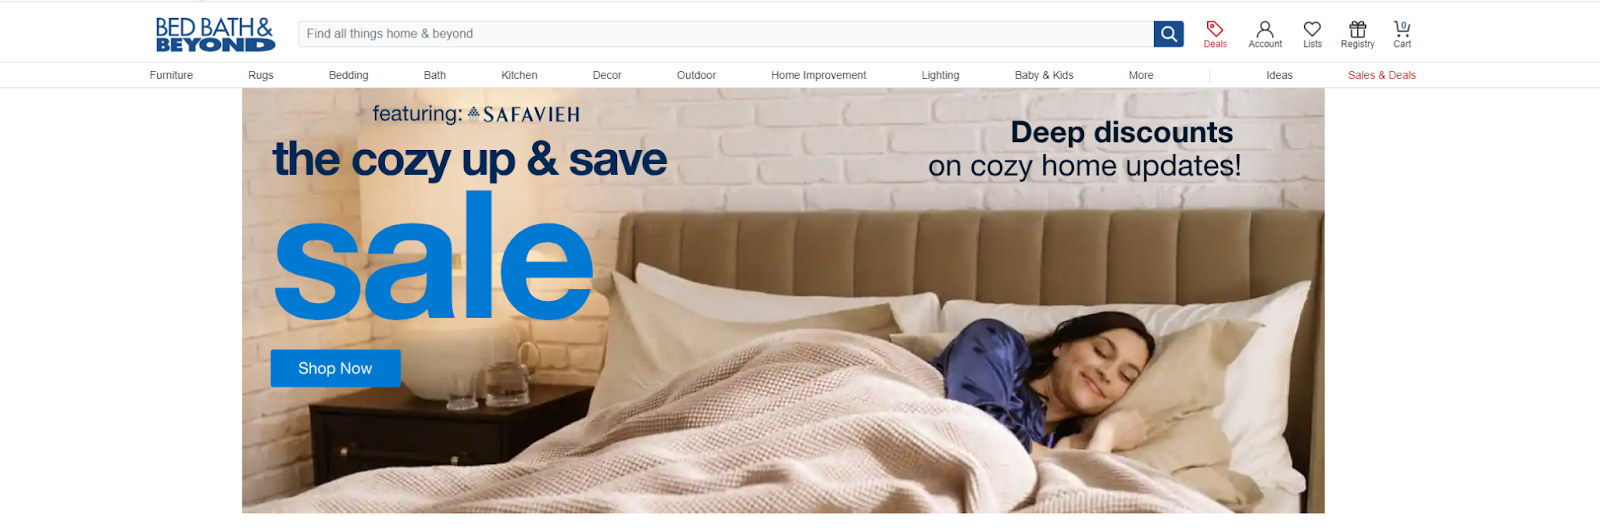 Overstock website home page